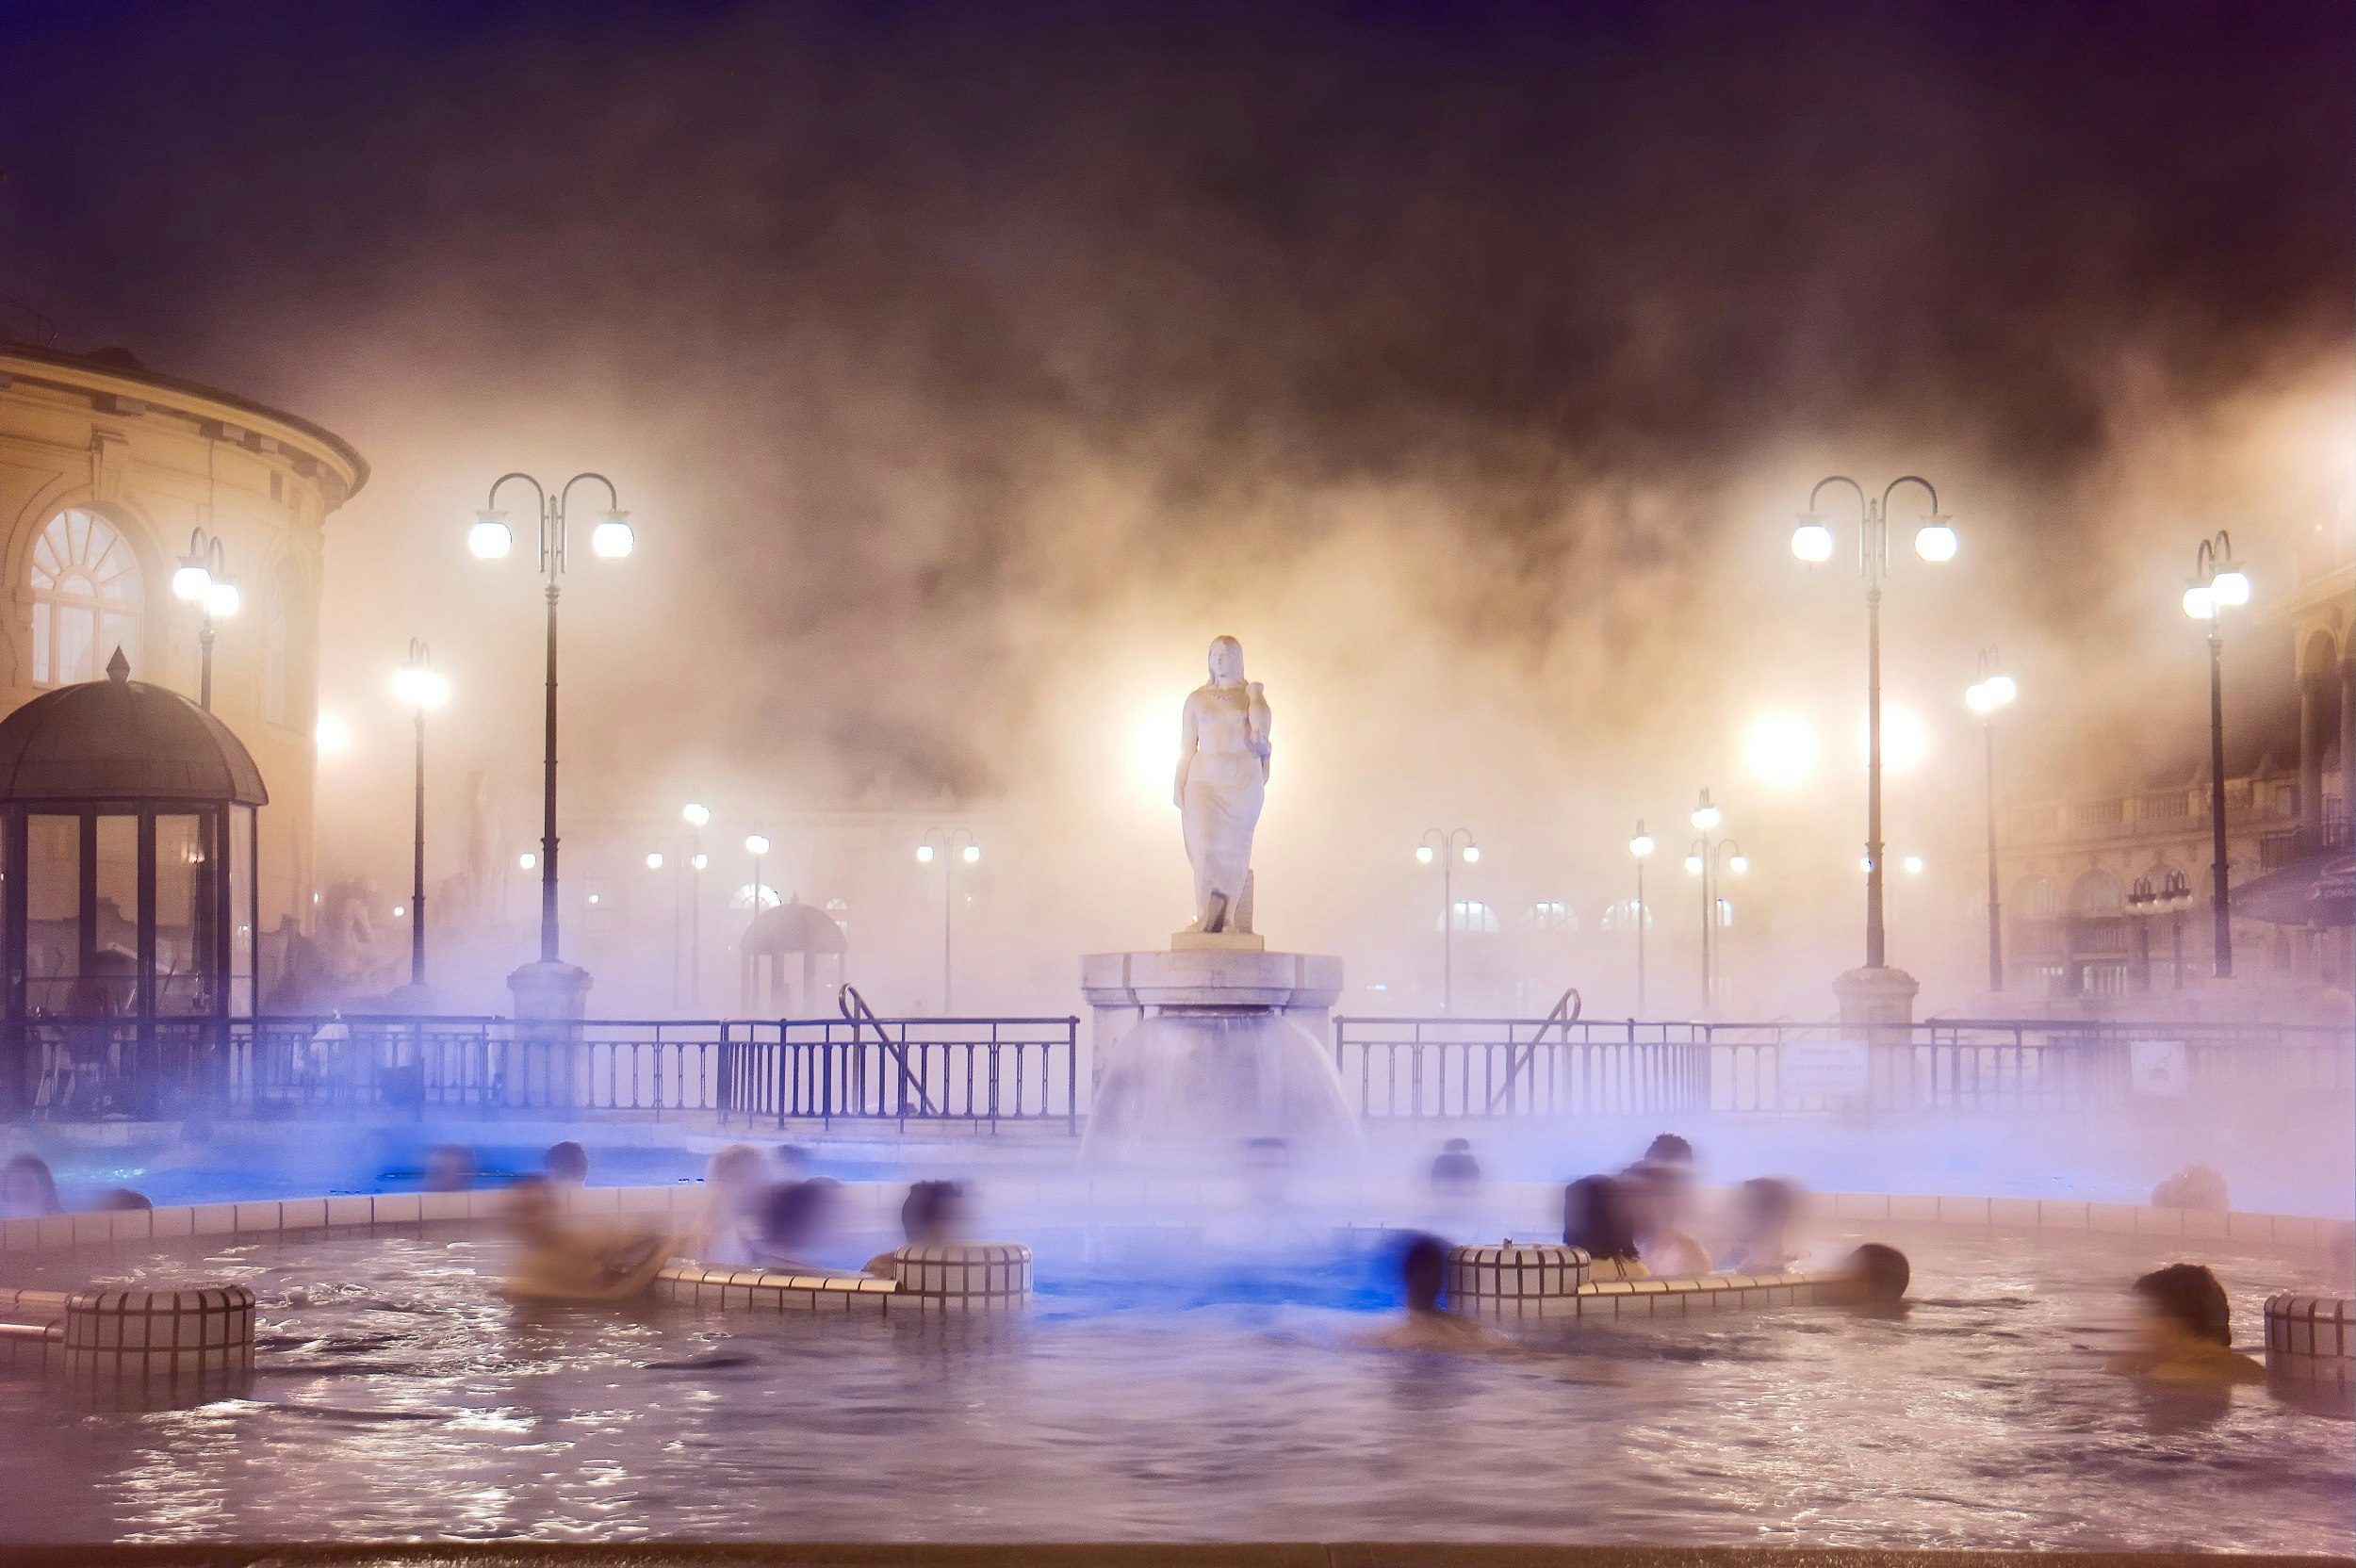 A nighttime shot of steam rising above a pool of water with several slightly blurred figures in it. There's a marble statue in the centre and several lit lampposts around the edge of the pool.